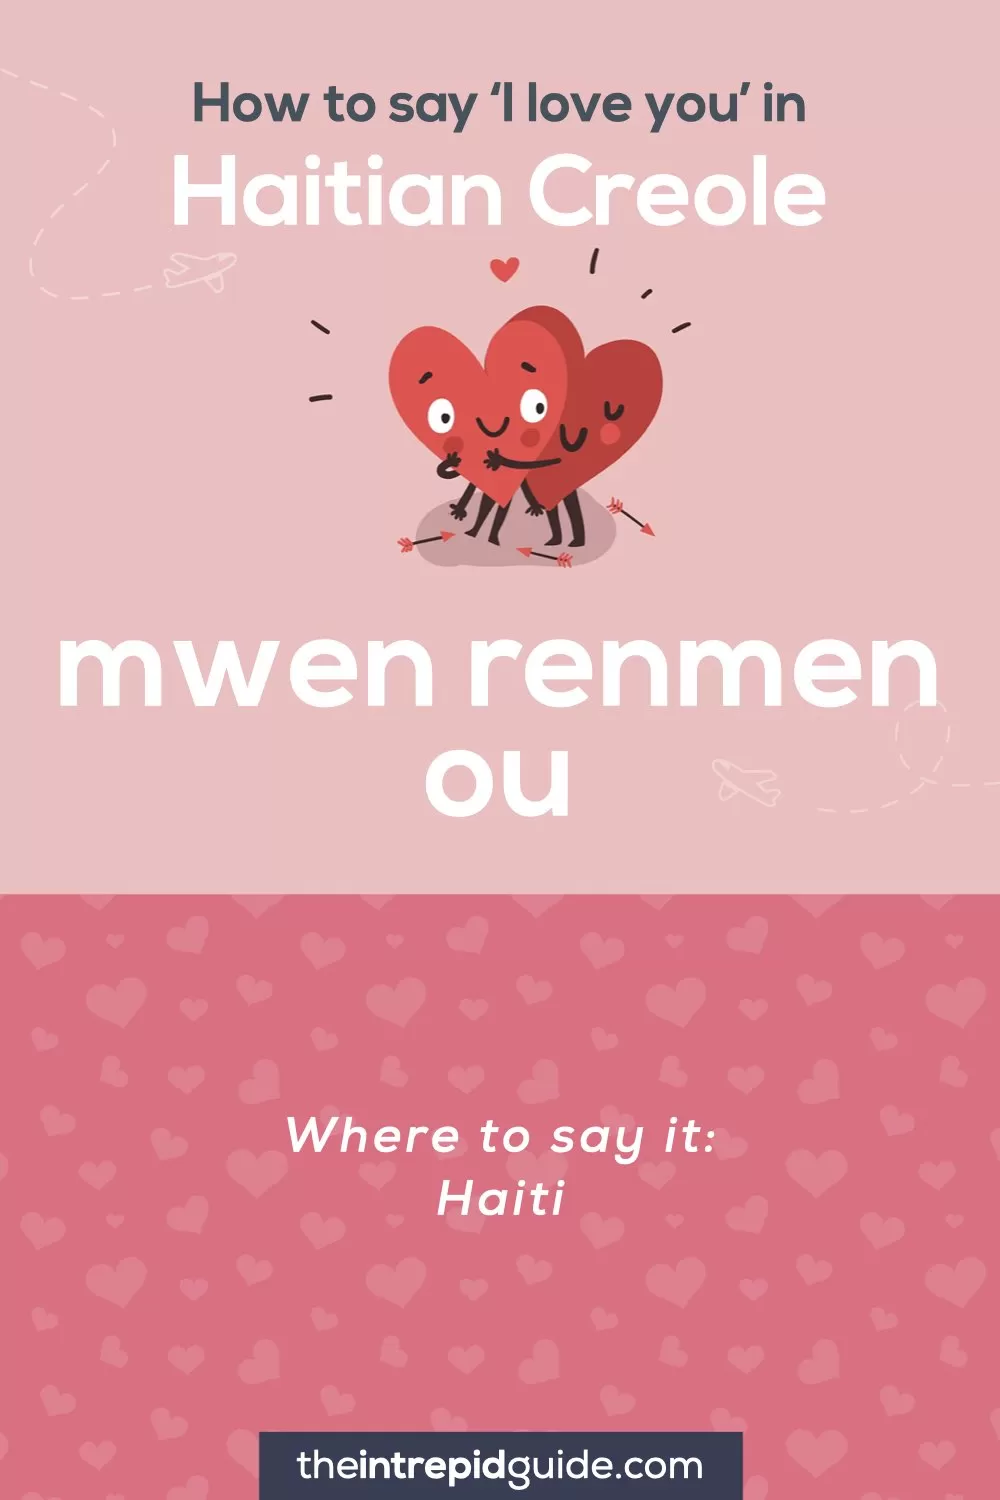 How to say I love you in different languages - Haitian Creole - mwen renmen ou